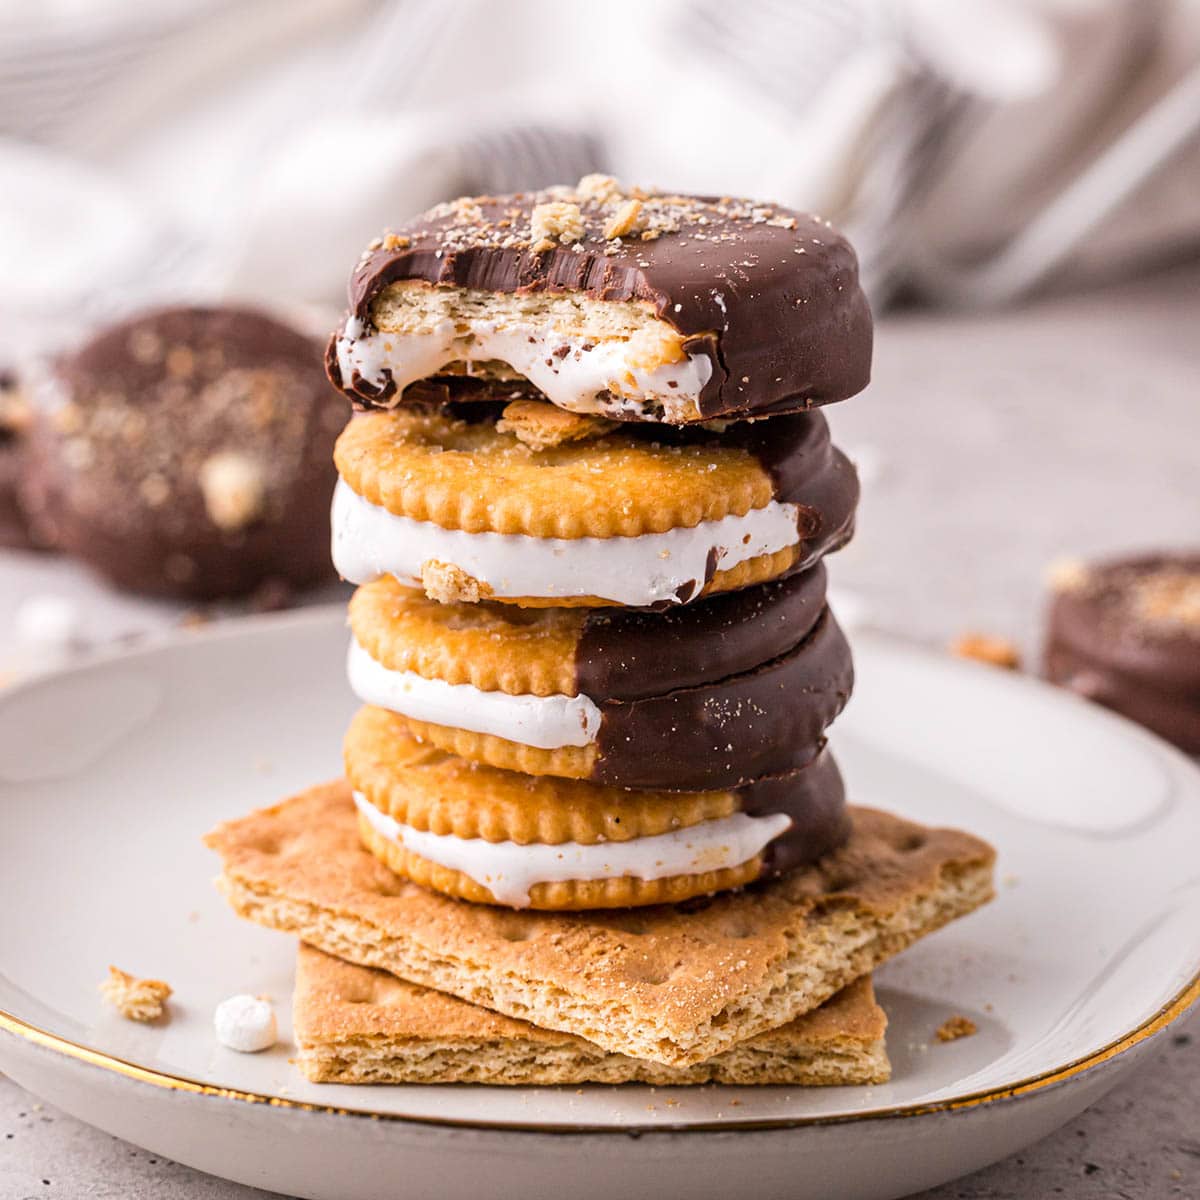 Oreo and Ritz Team Up on Cookie and Cracker Sandwich